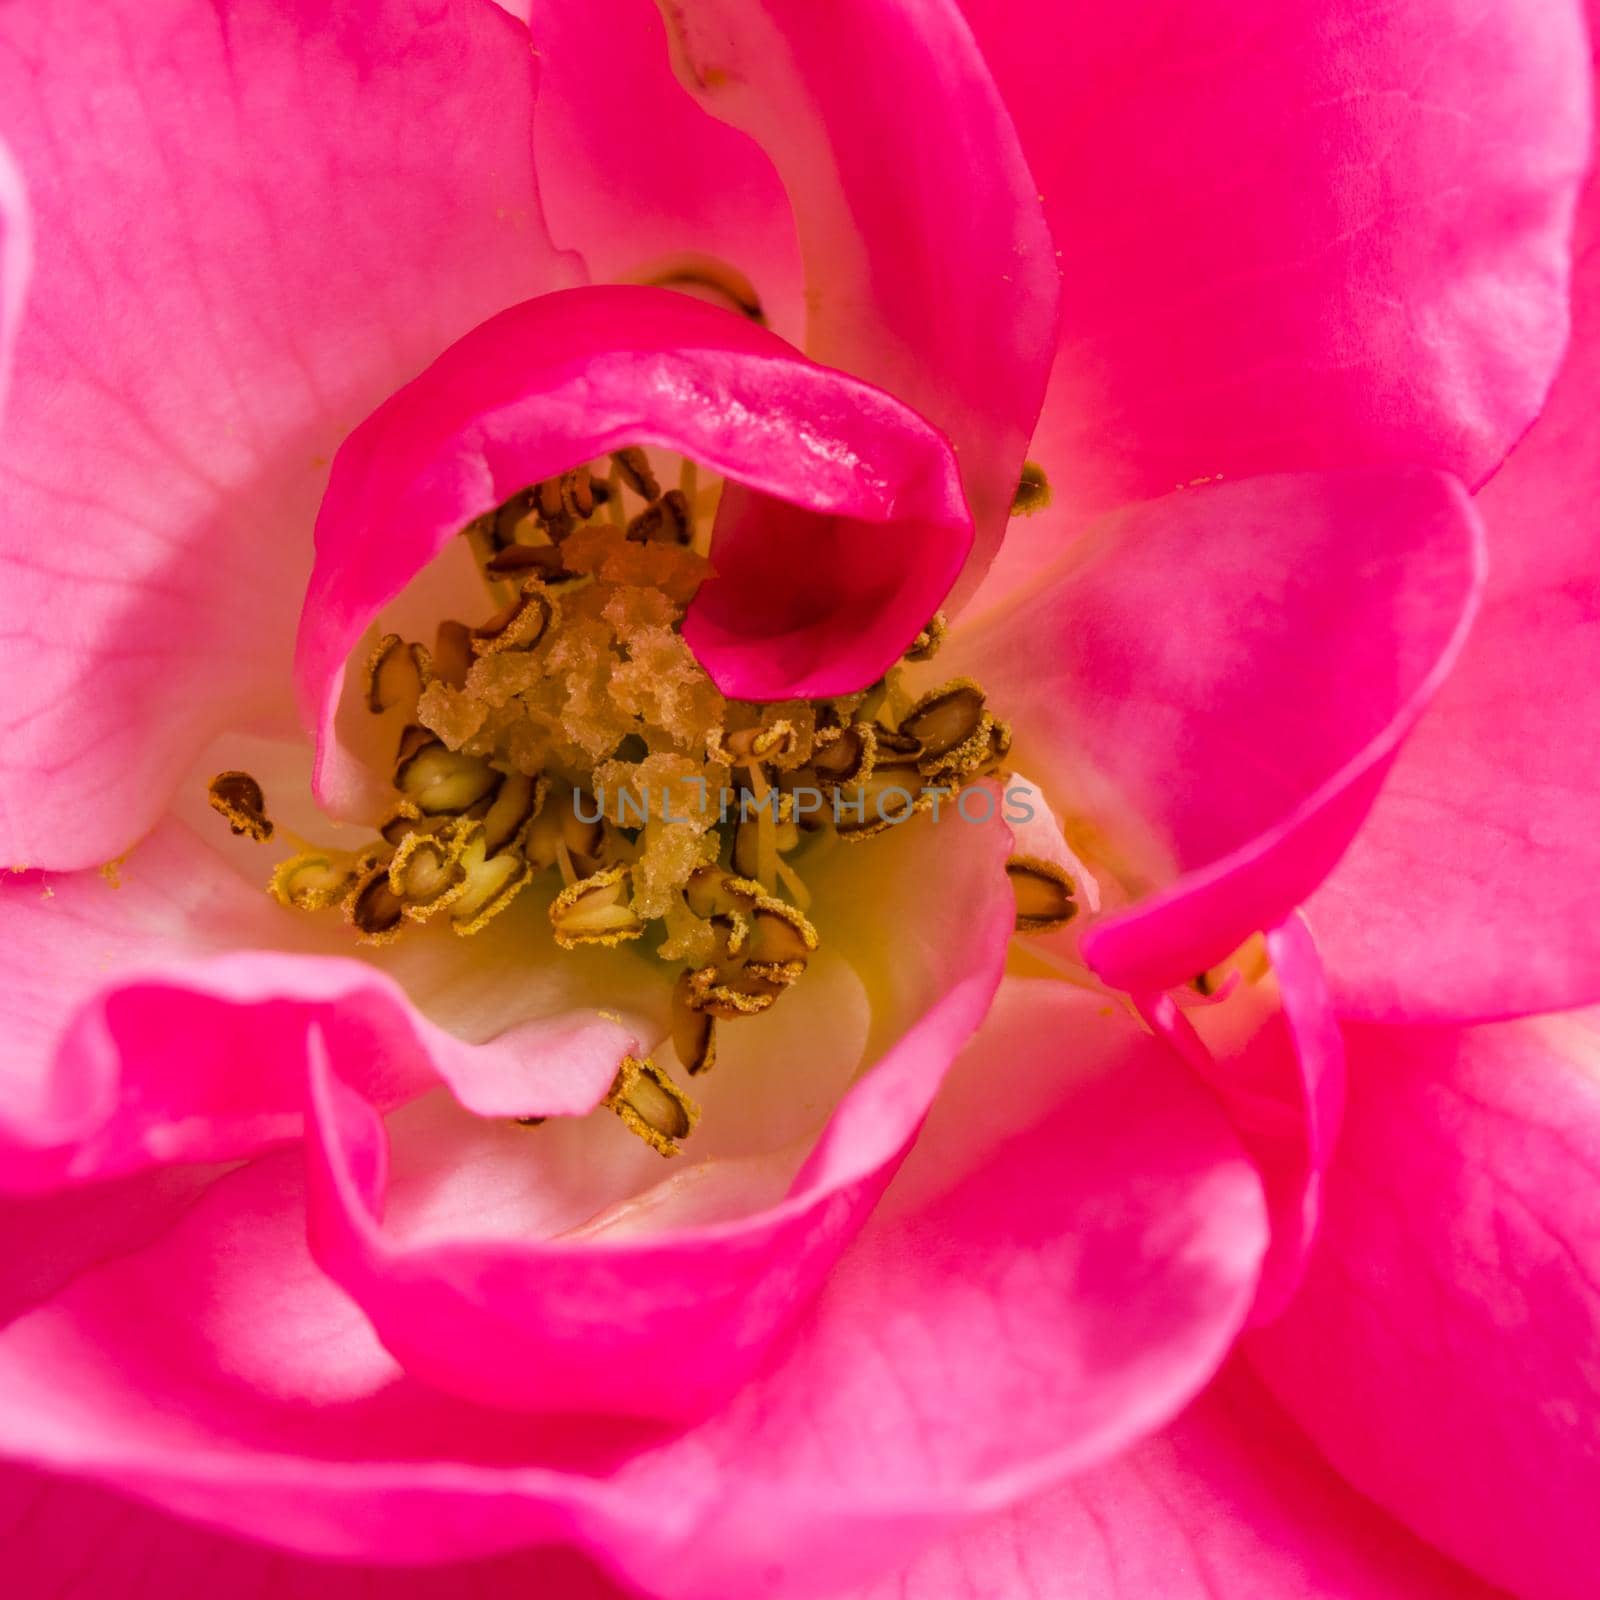 Soft focus, abstract floral background, pink rose flower petals. Macro flowers backdrop for holiday design by Olayola